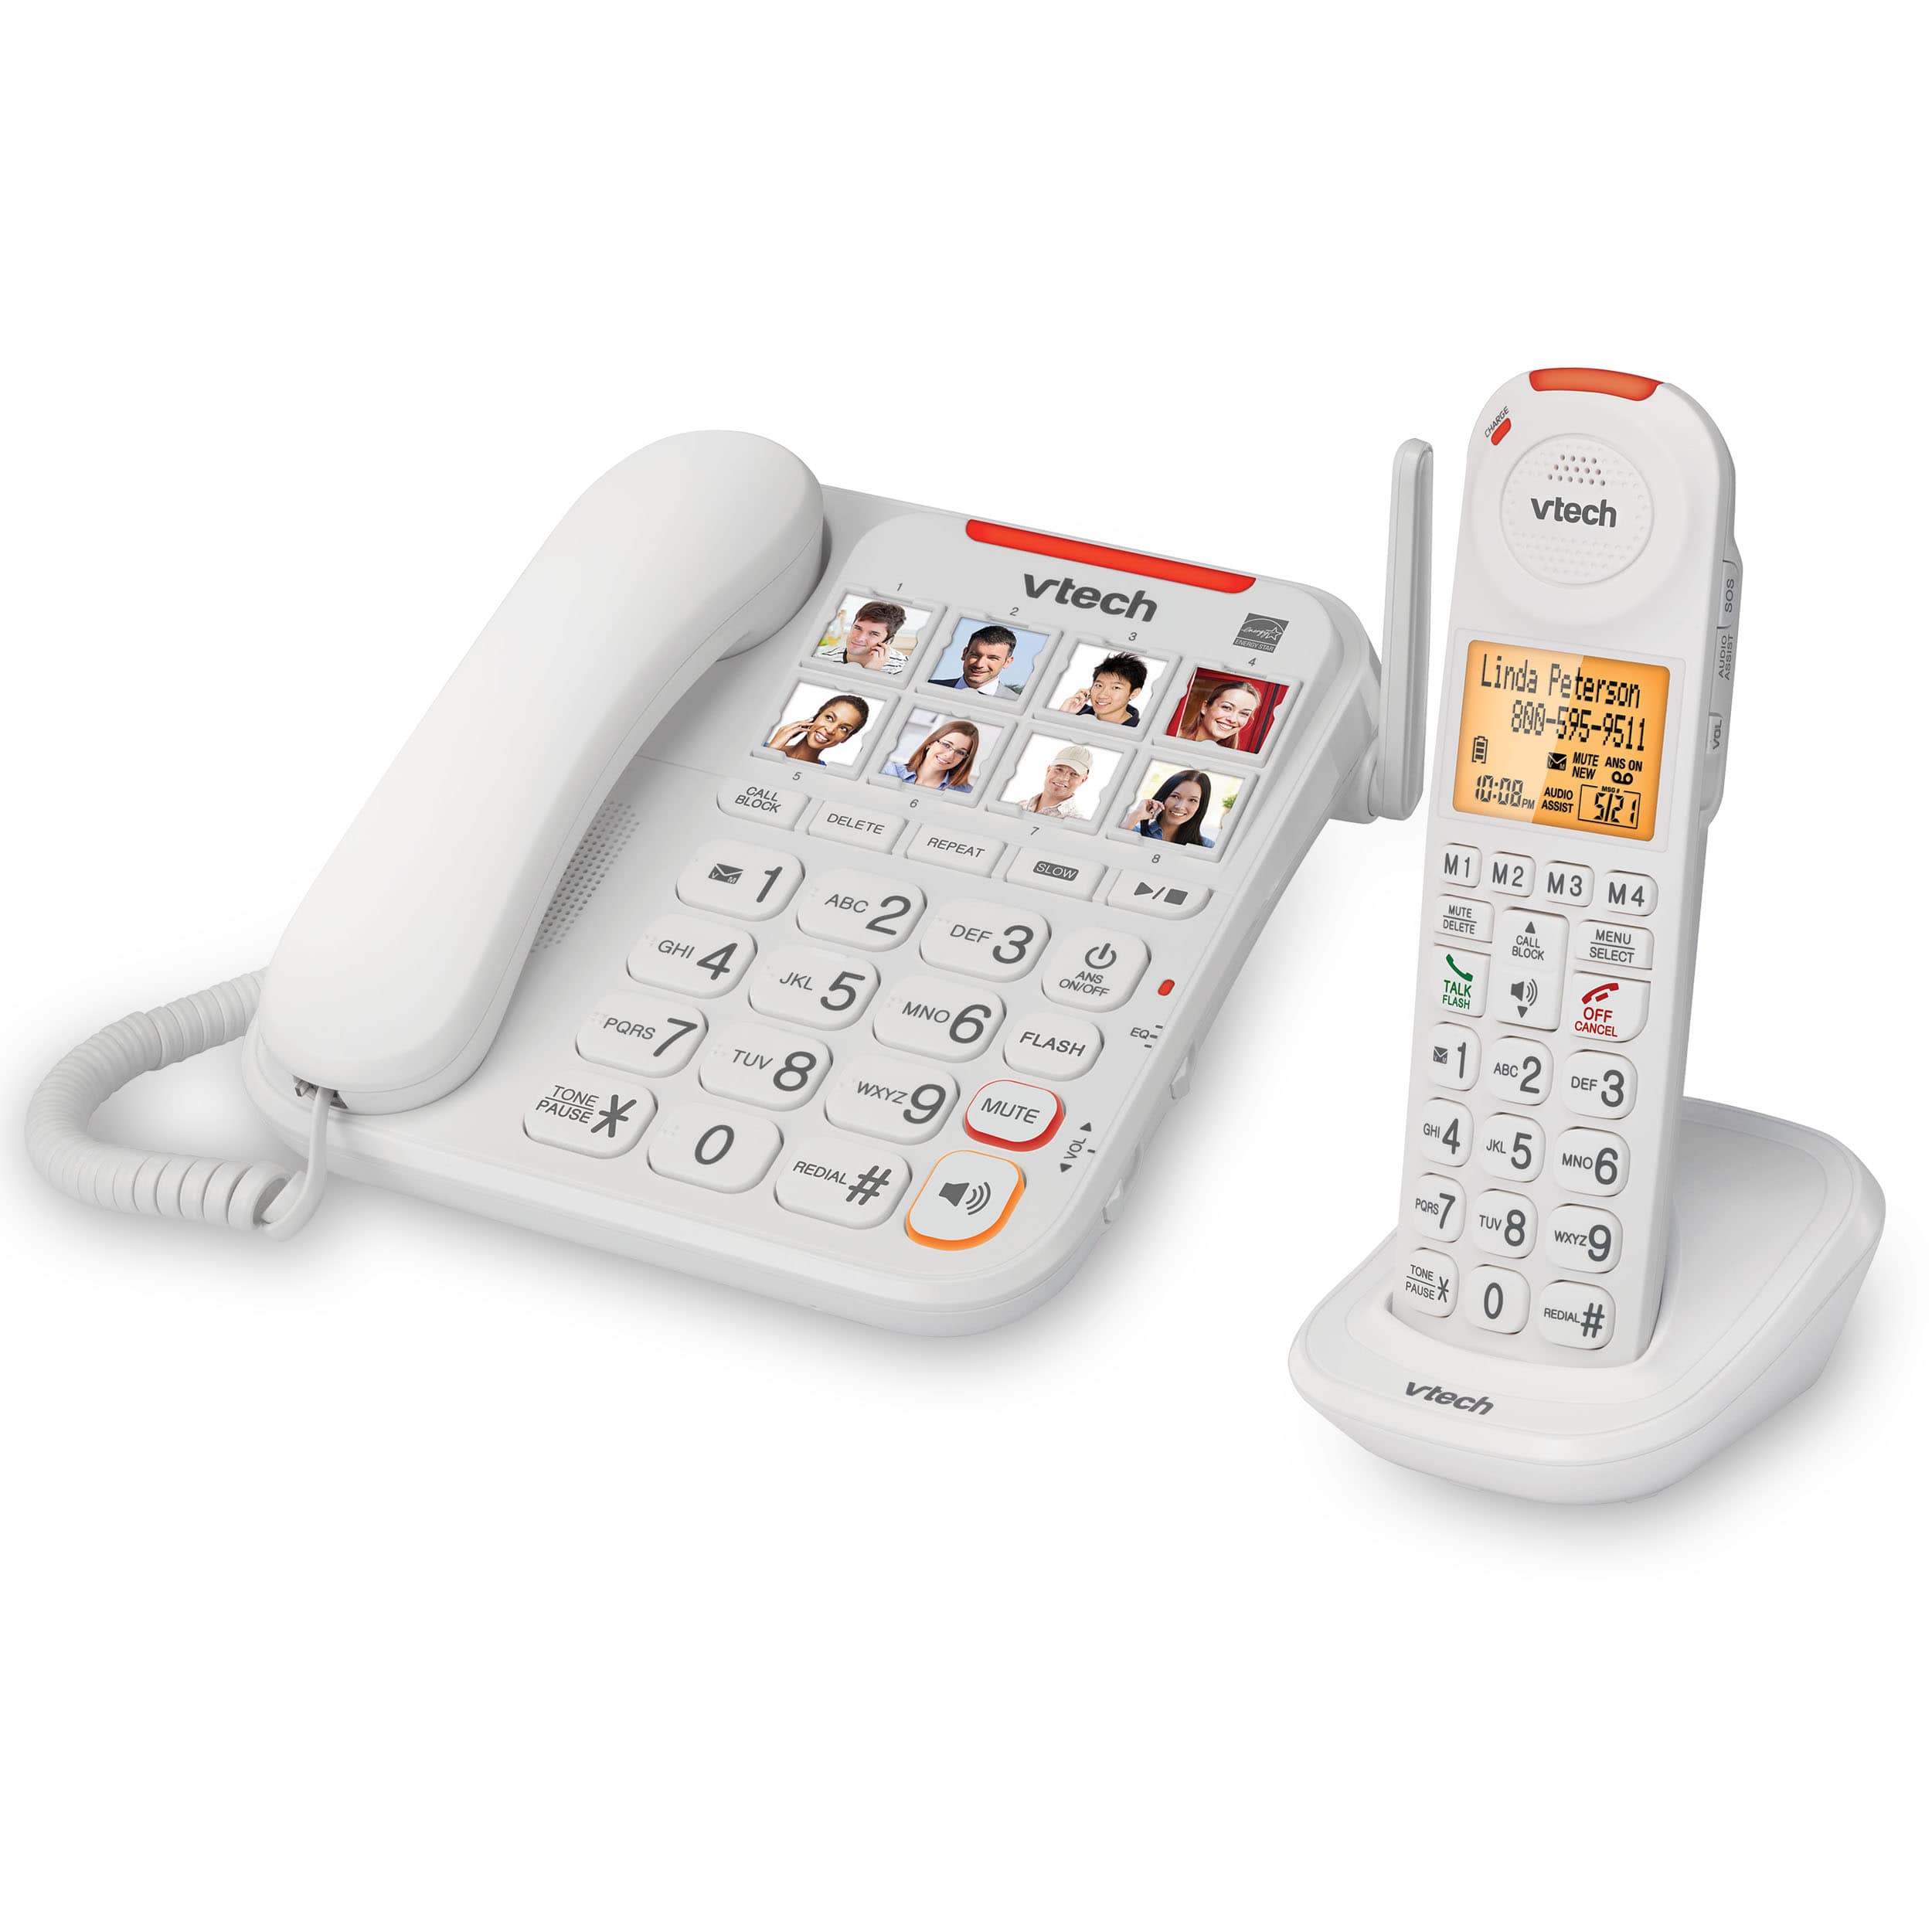 AMPLIFIED CORDED/CORDLESS ANSWERING SYSTEM W/ BIG BUTTONS & DISPLAY